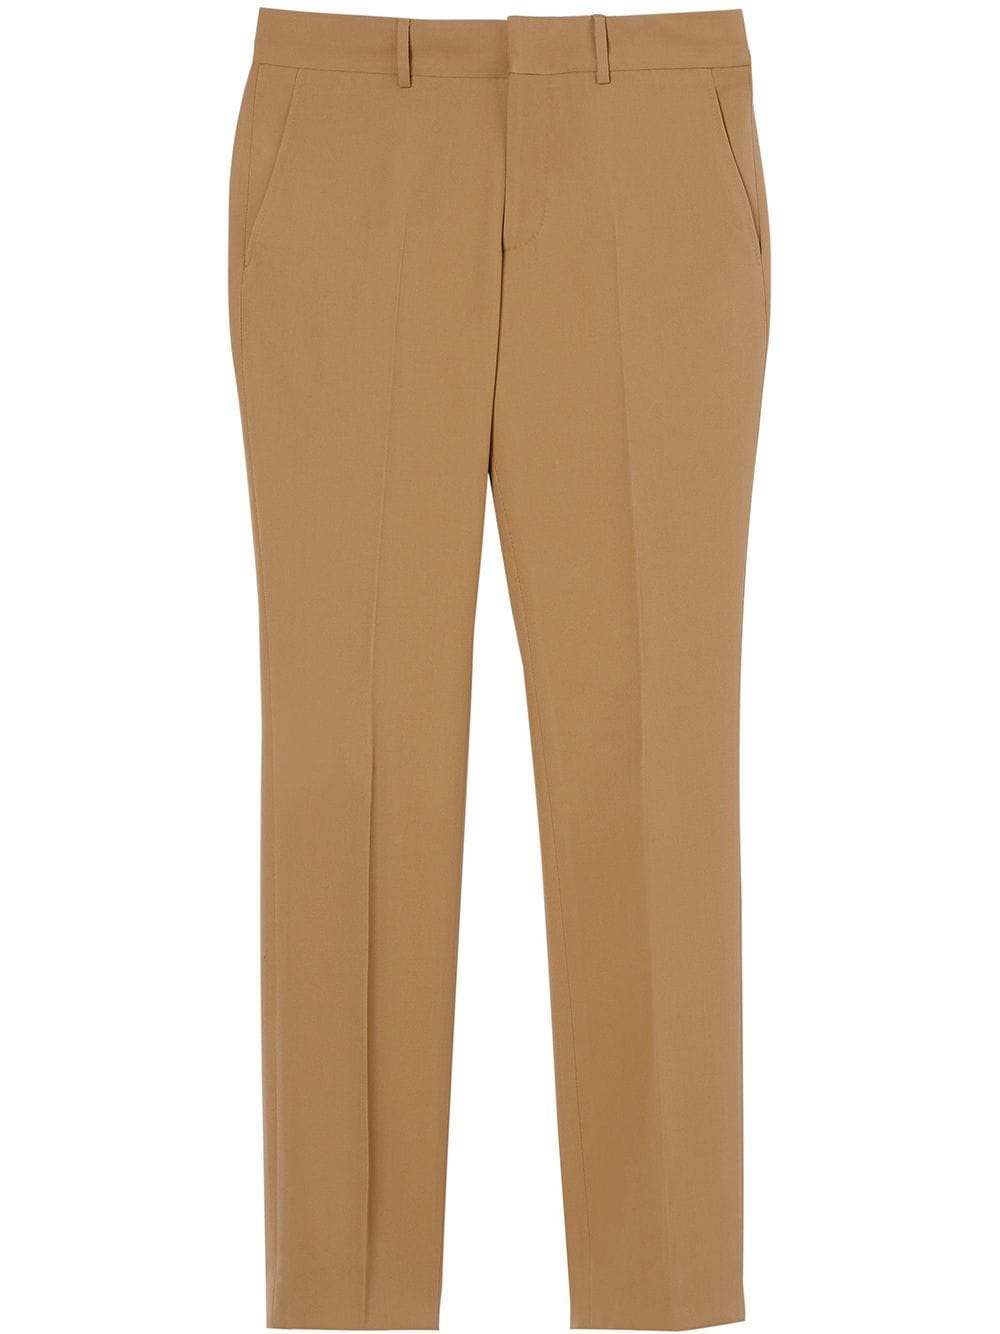 BURBERRY TWILL TAILORED TROUSERS